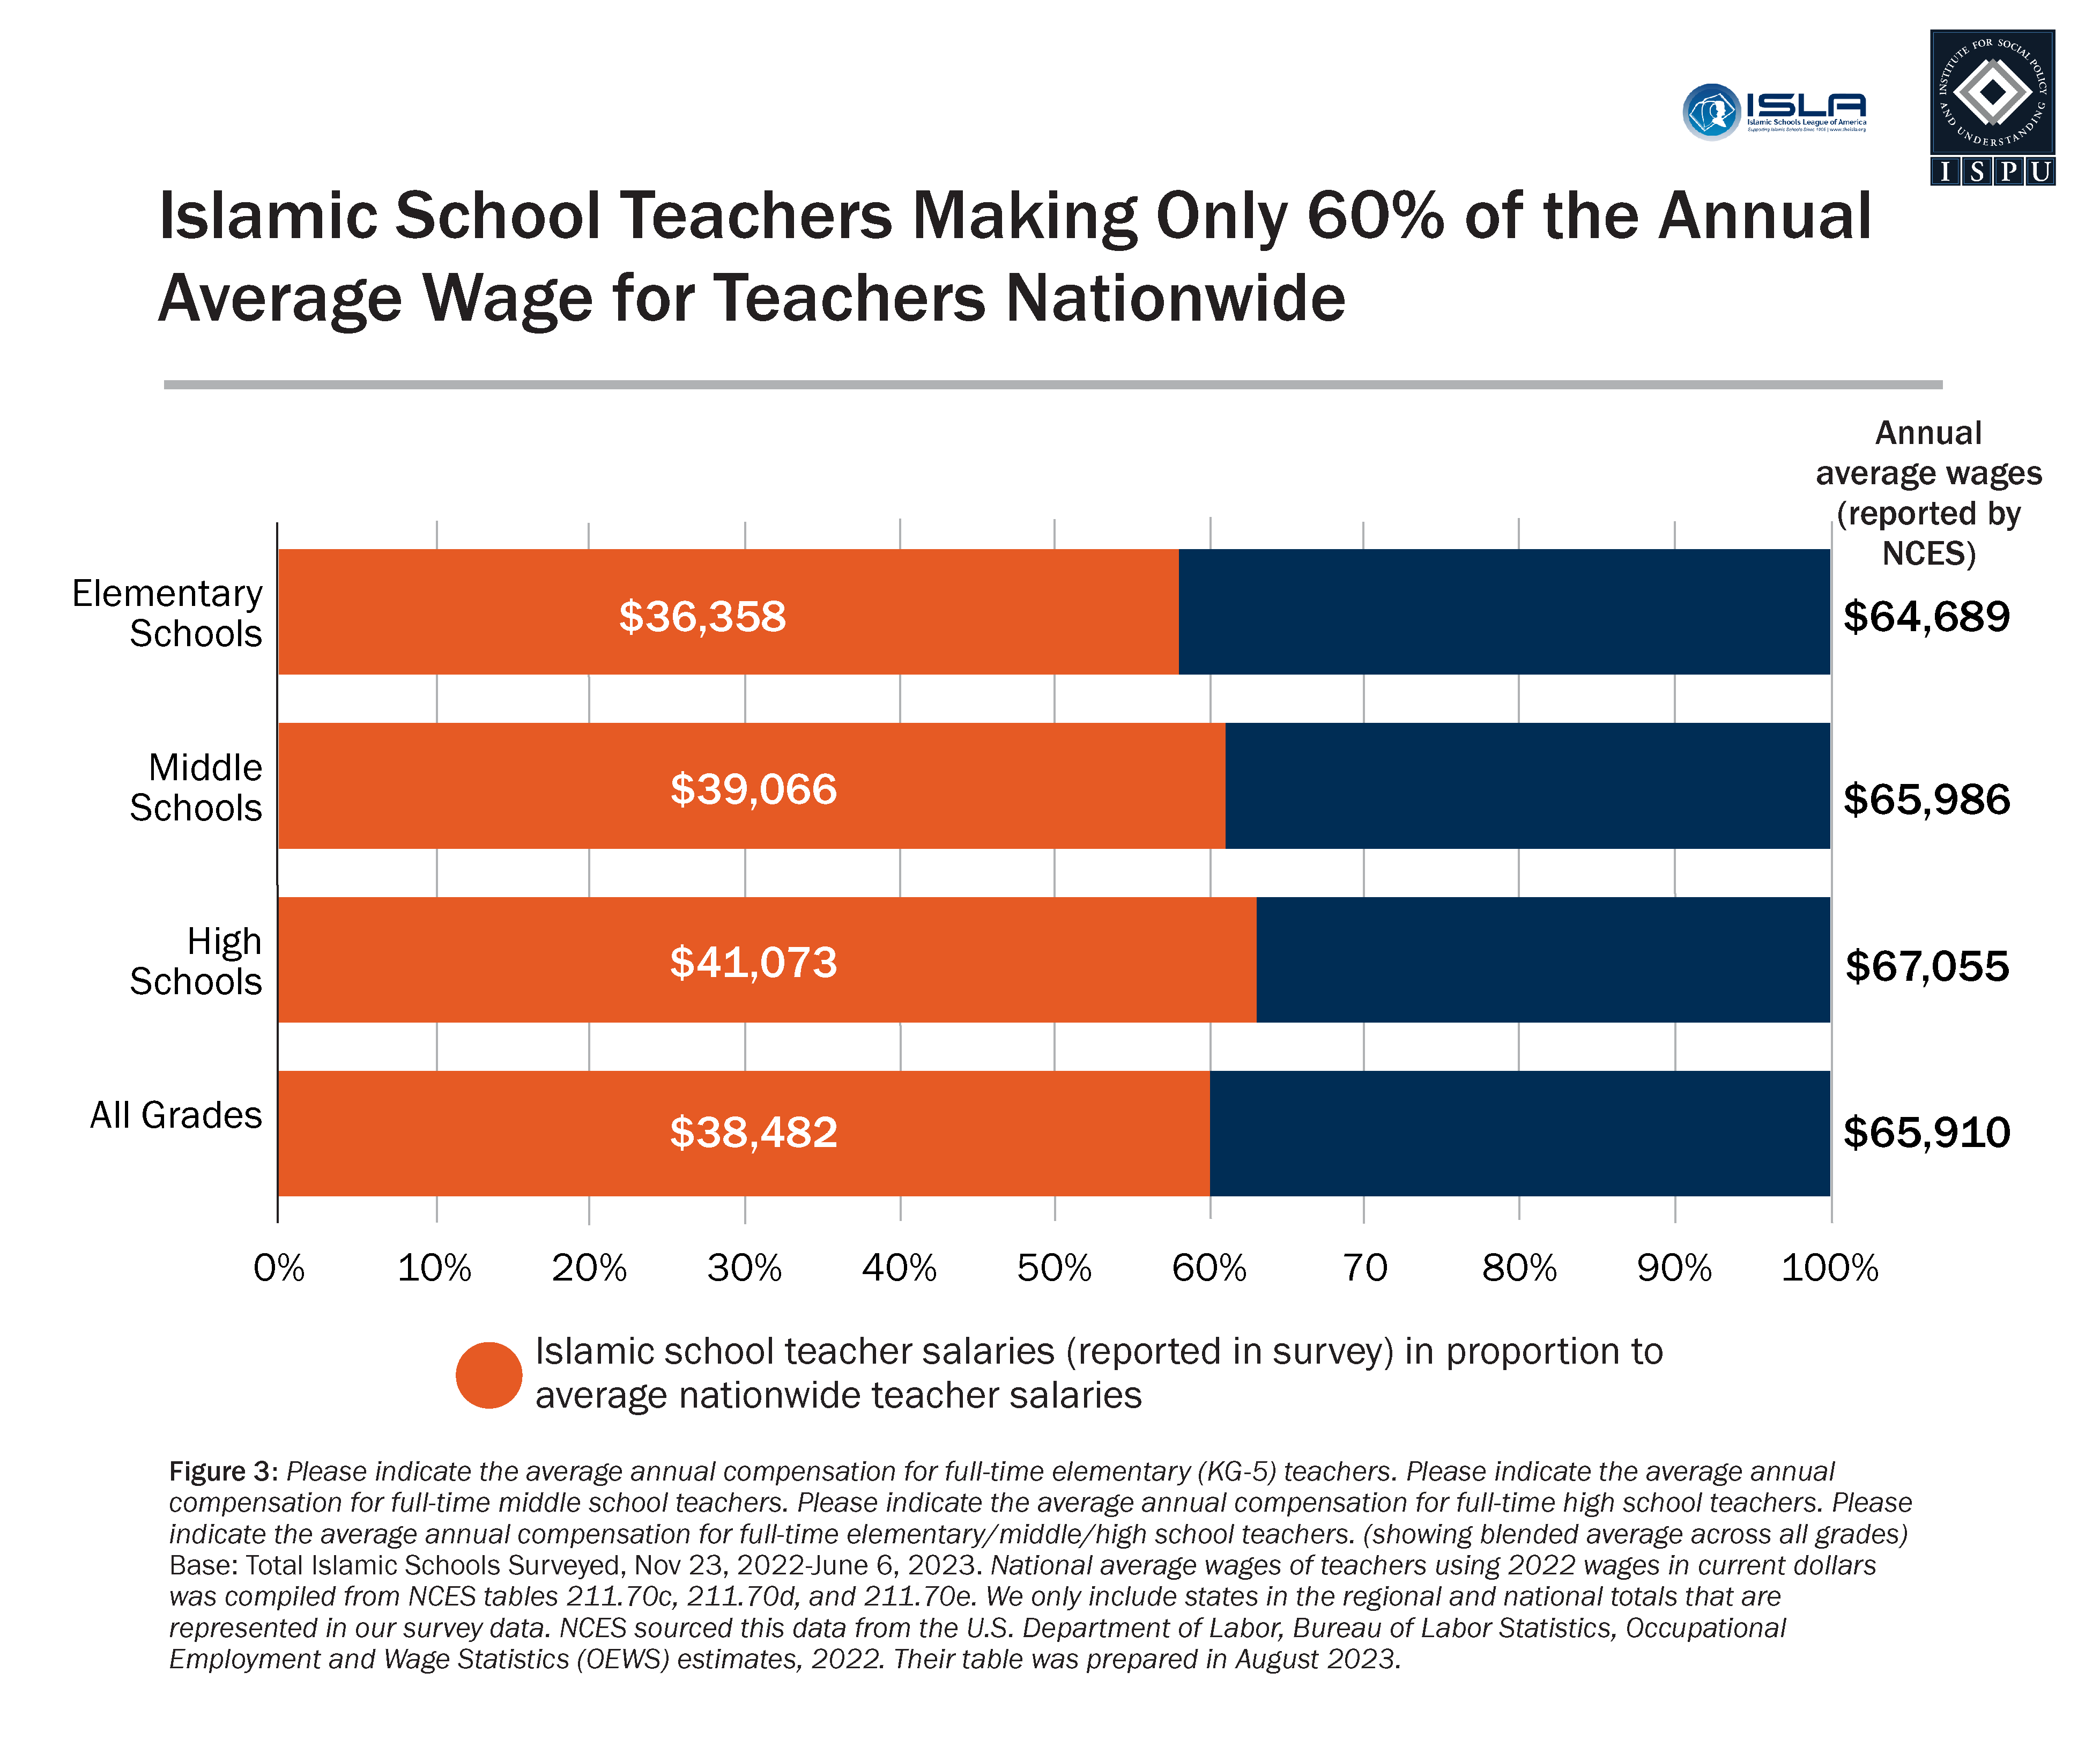 A horizontal stacked bar graph showing percentage of the annual average wages that Islamic school teachers are making by grade and overall.